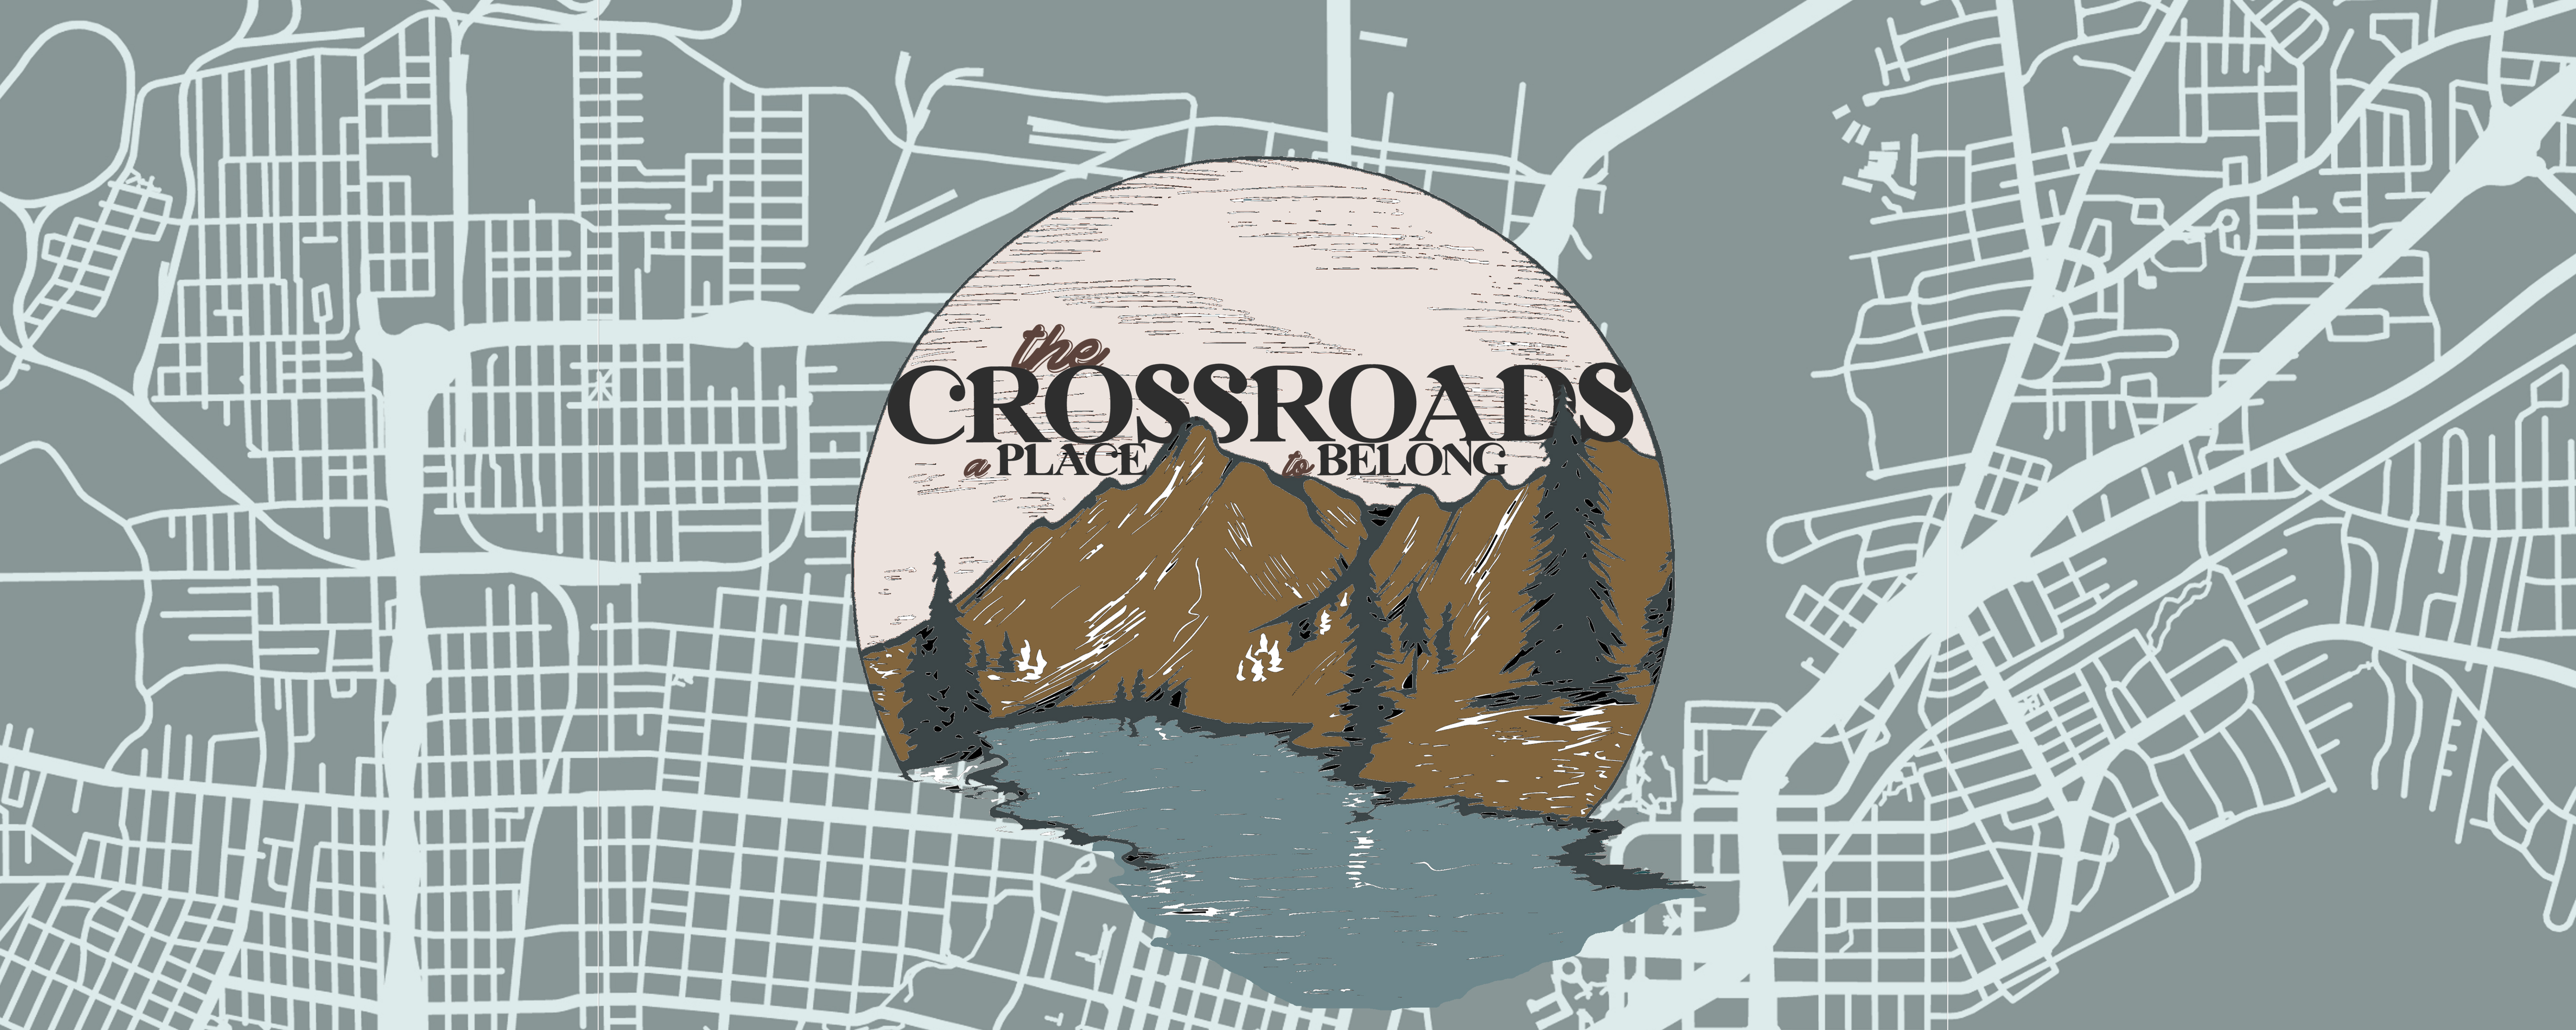 The Crossroads - A Place to Belong